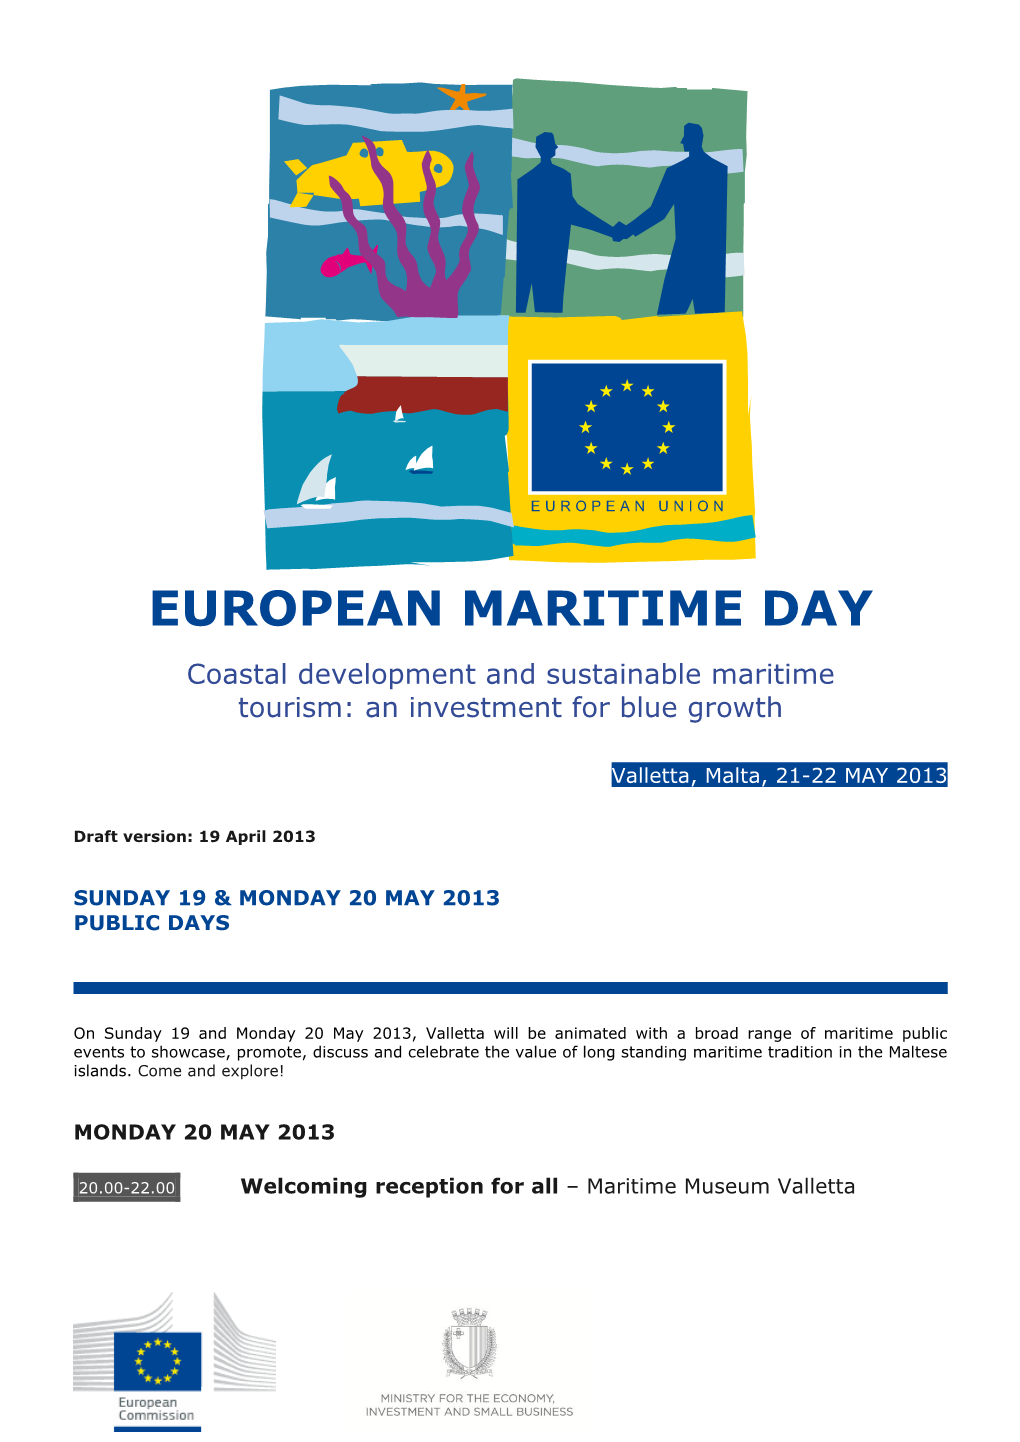 EUROPEAN MARITIME DAY Coastal Development and Sustainable Maritime Tourism: an Investment for Blue Growth